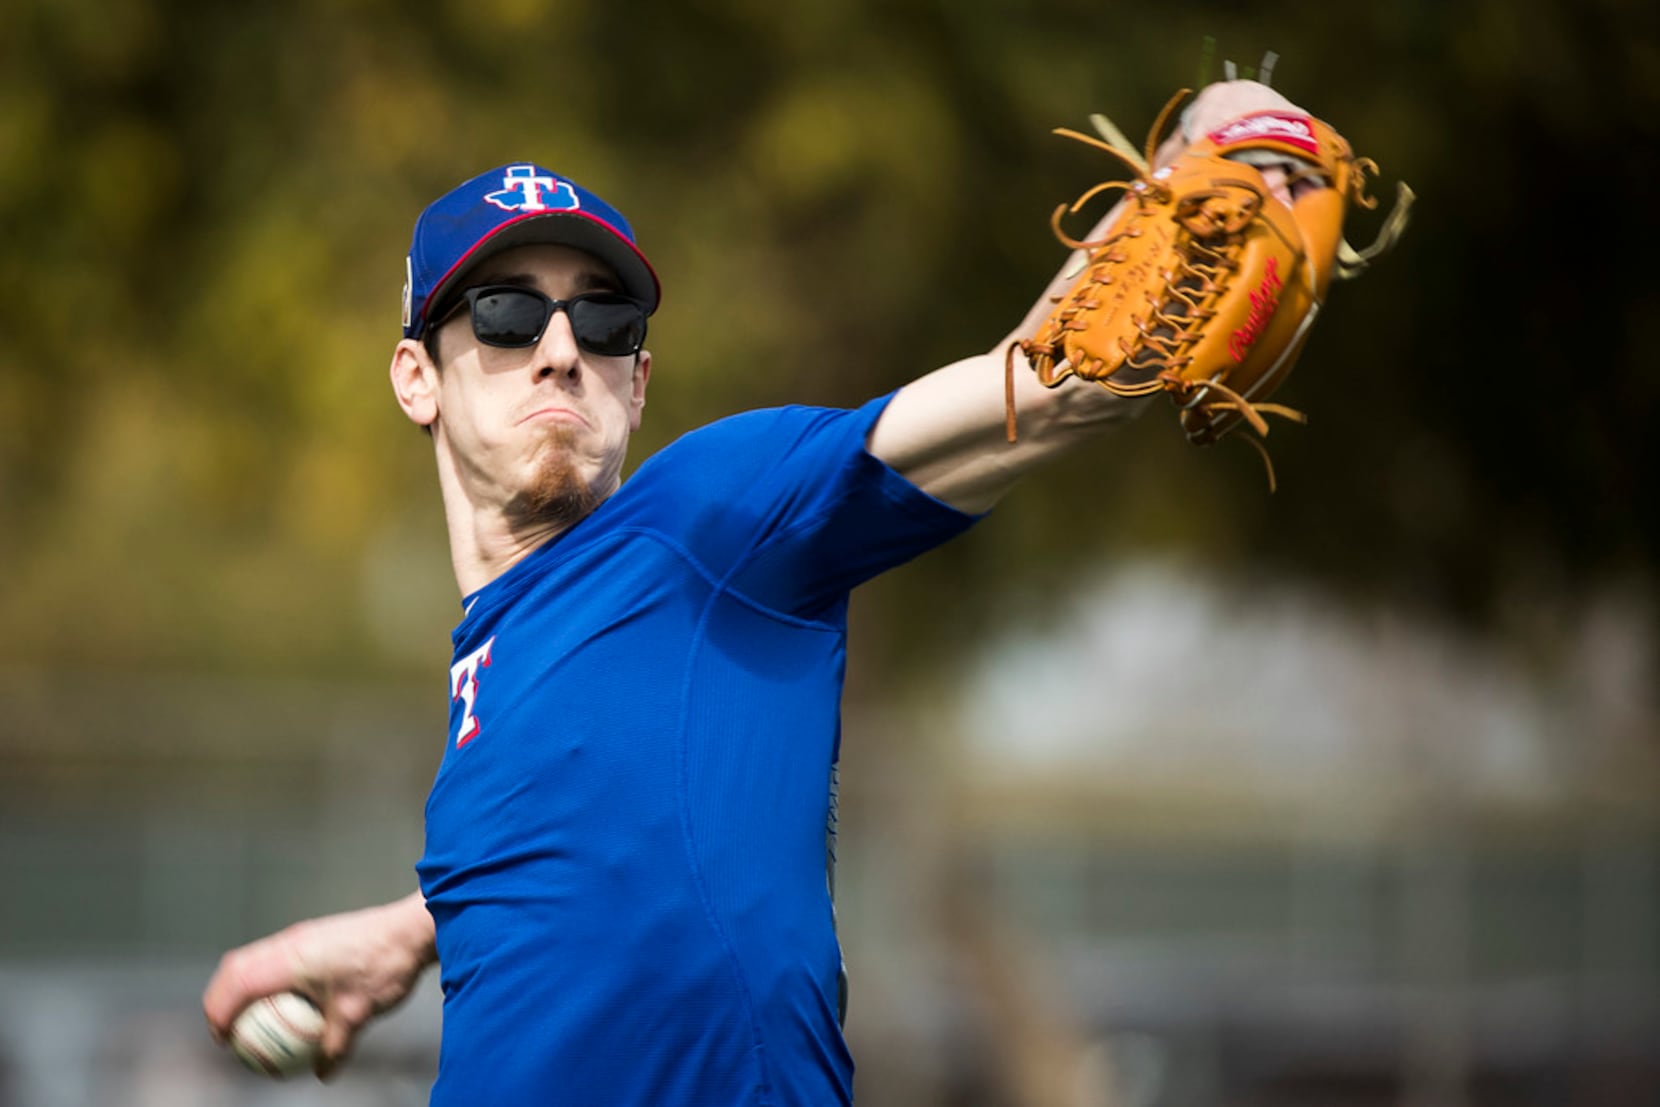 Rangers' Tim Lincecum set to pitch in a game for the first time in